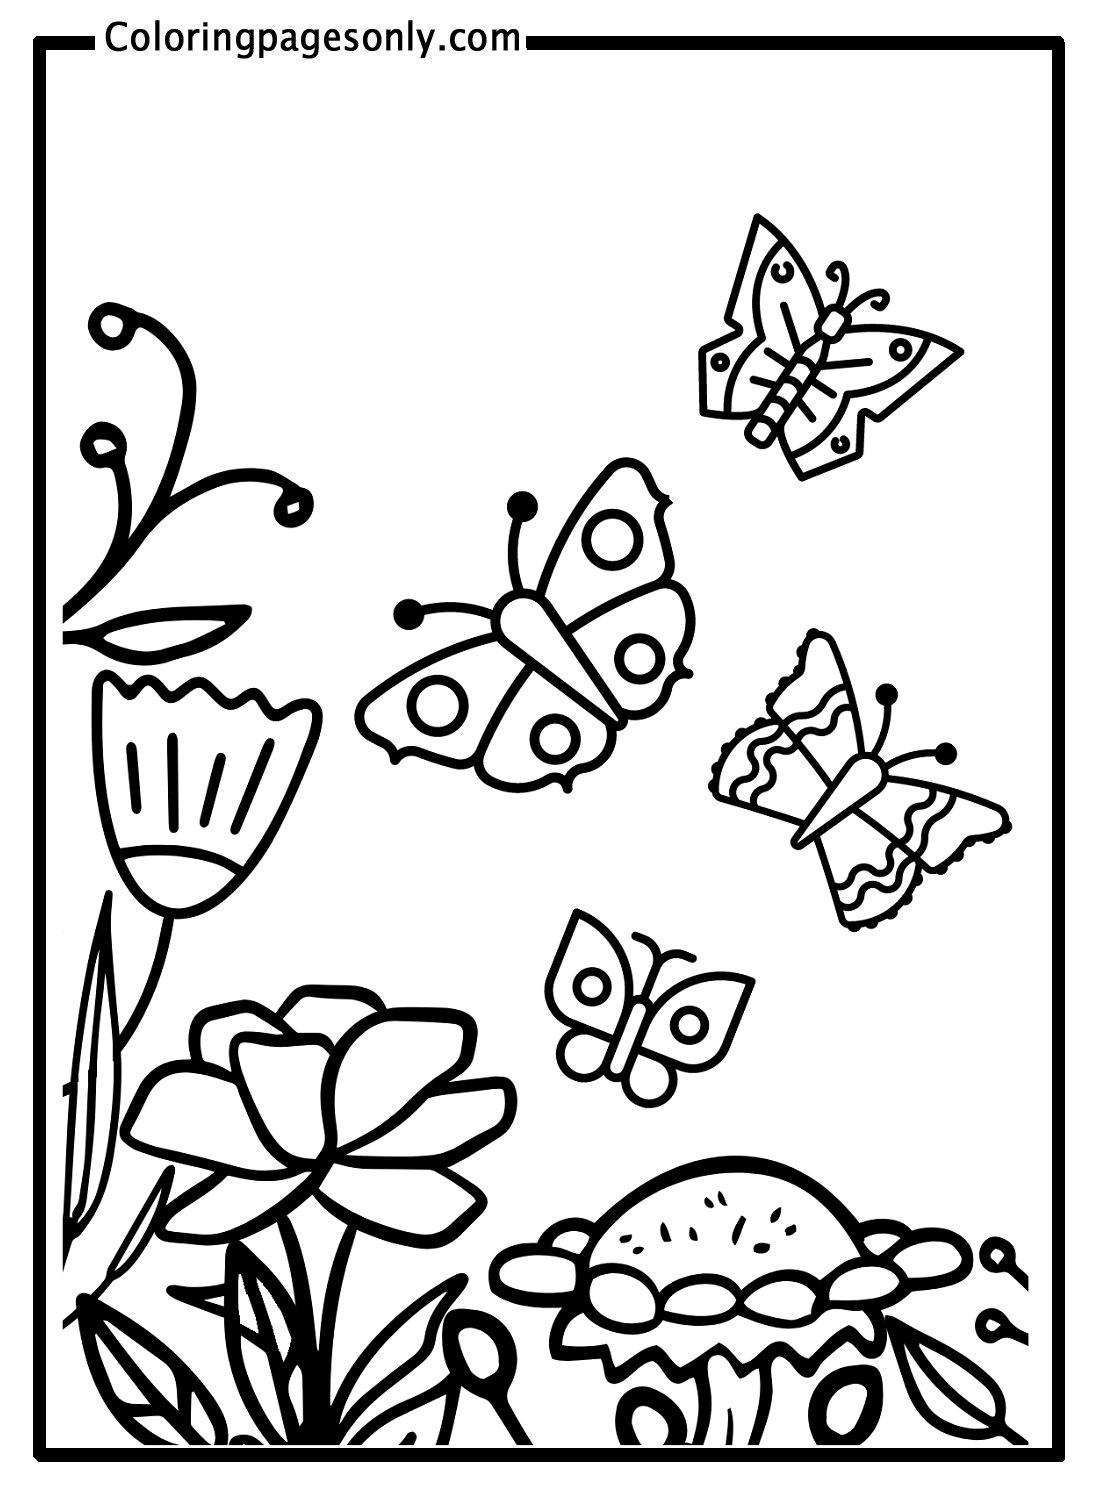 Butterflies with Flowers Coloring Page